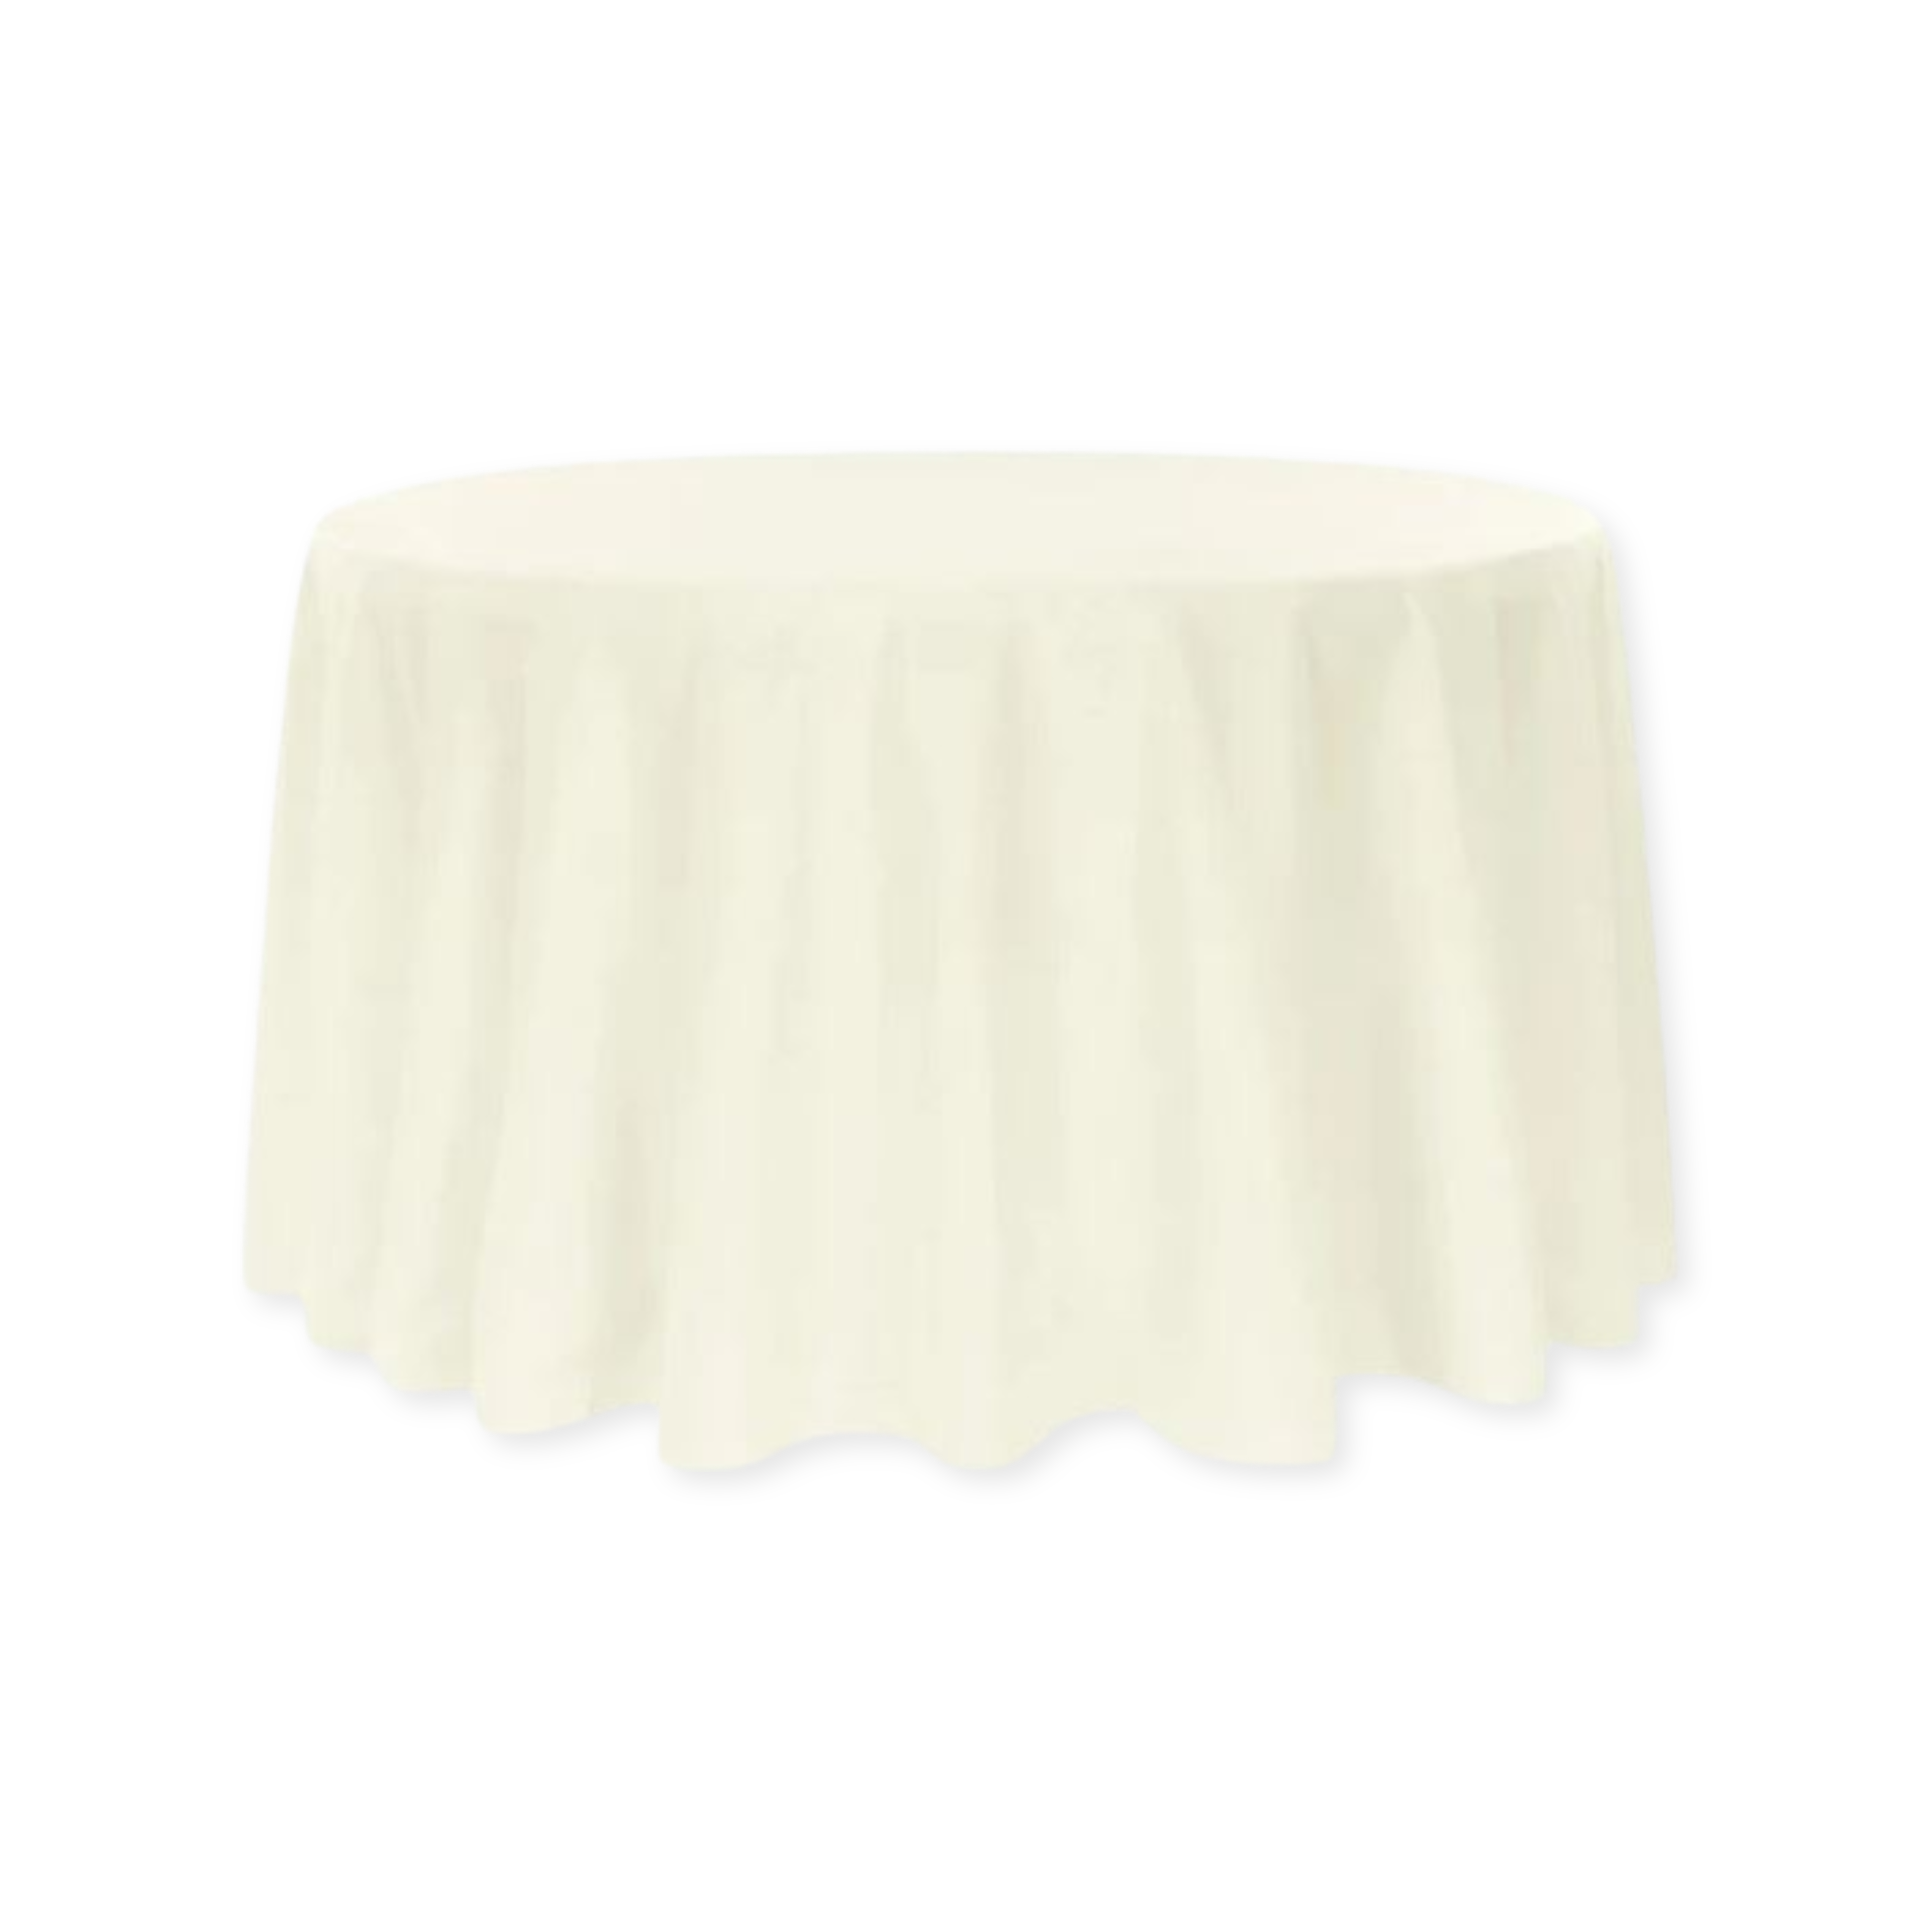 Tablecloth polyester round ivory commercial grade wedding party event rental panama city beach